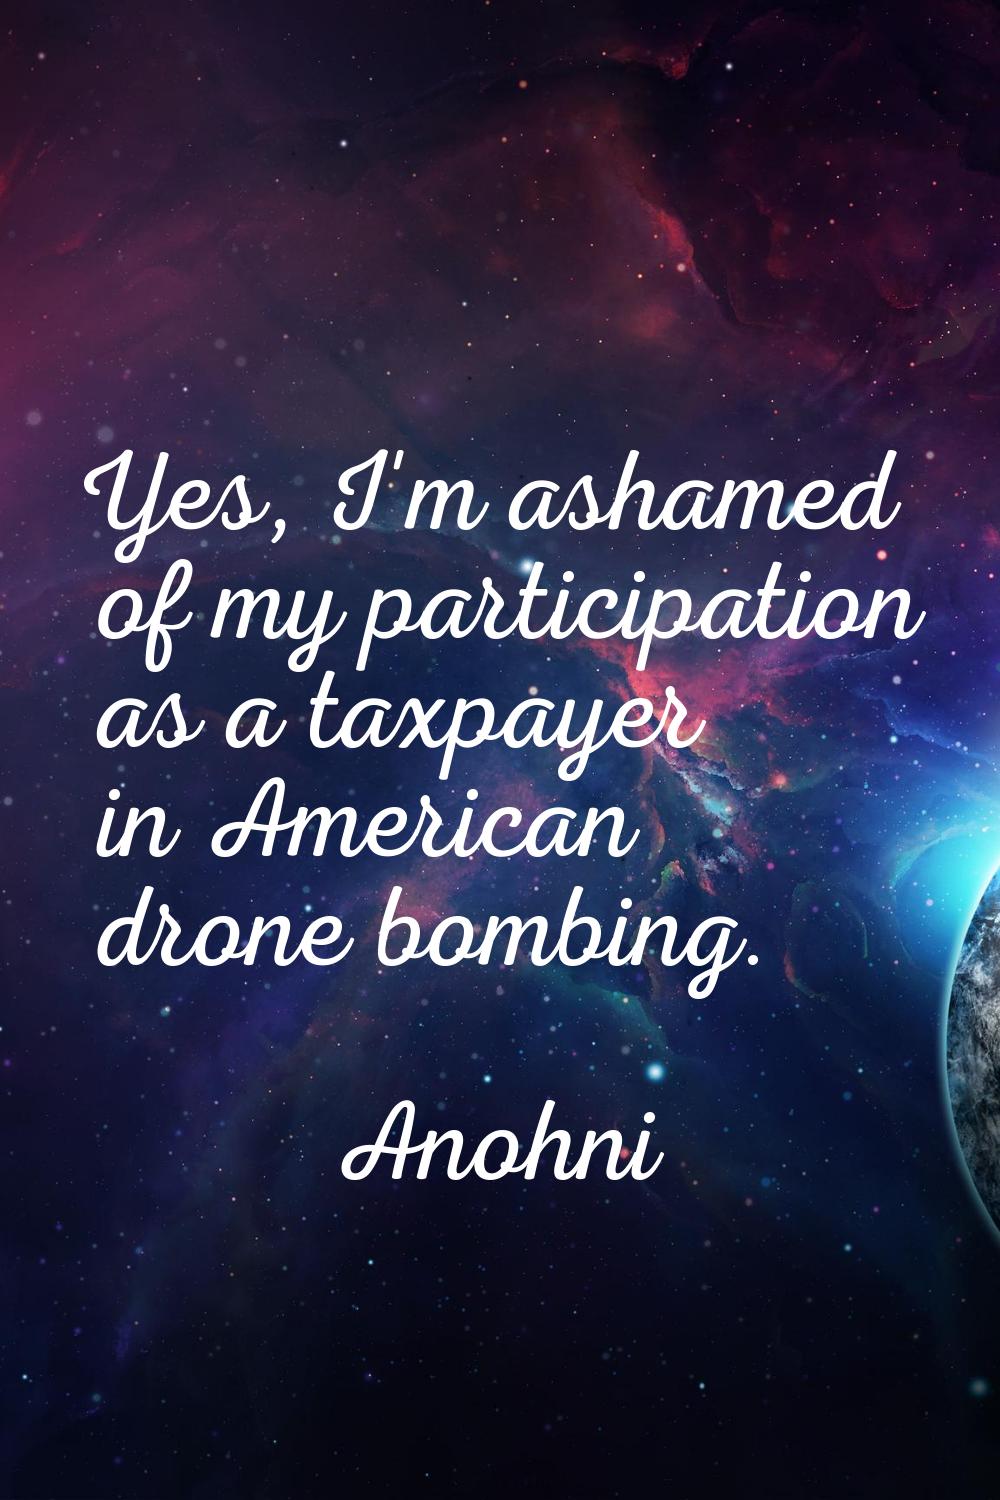 Yes, I'm ashamed of my participation as a taxpayer in American drone bombing.